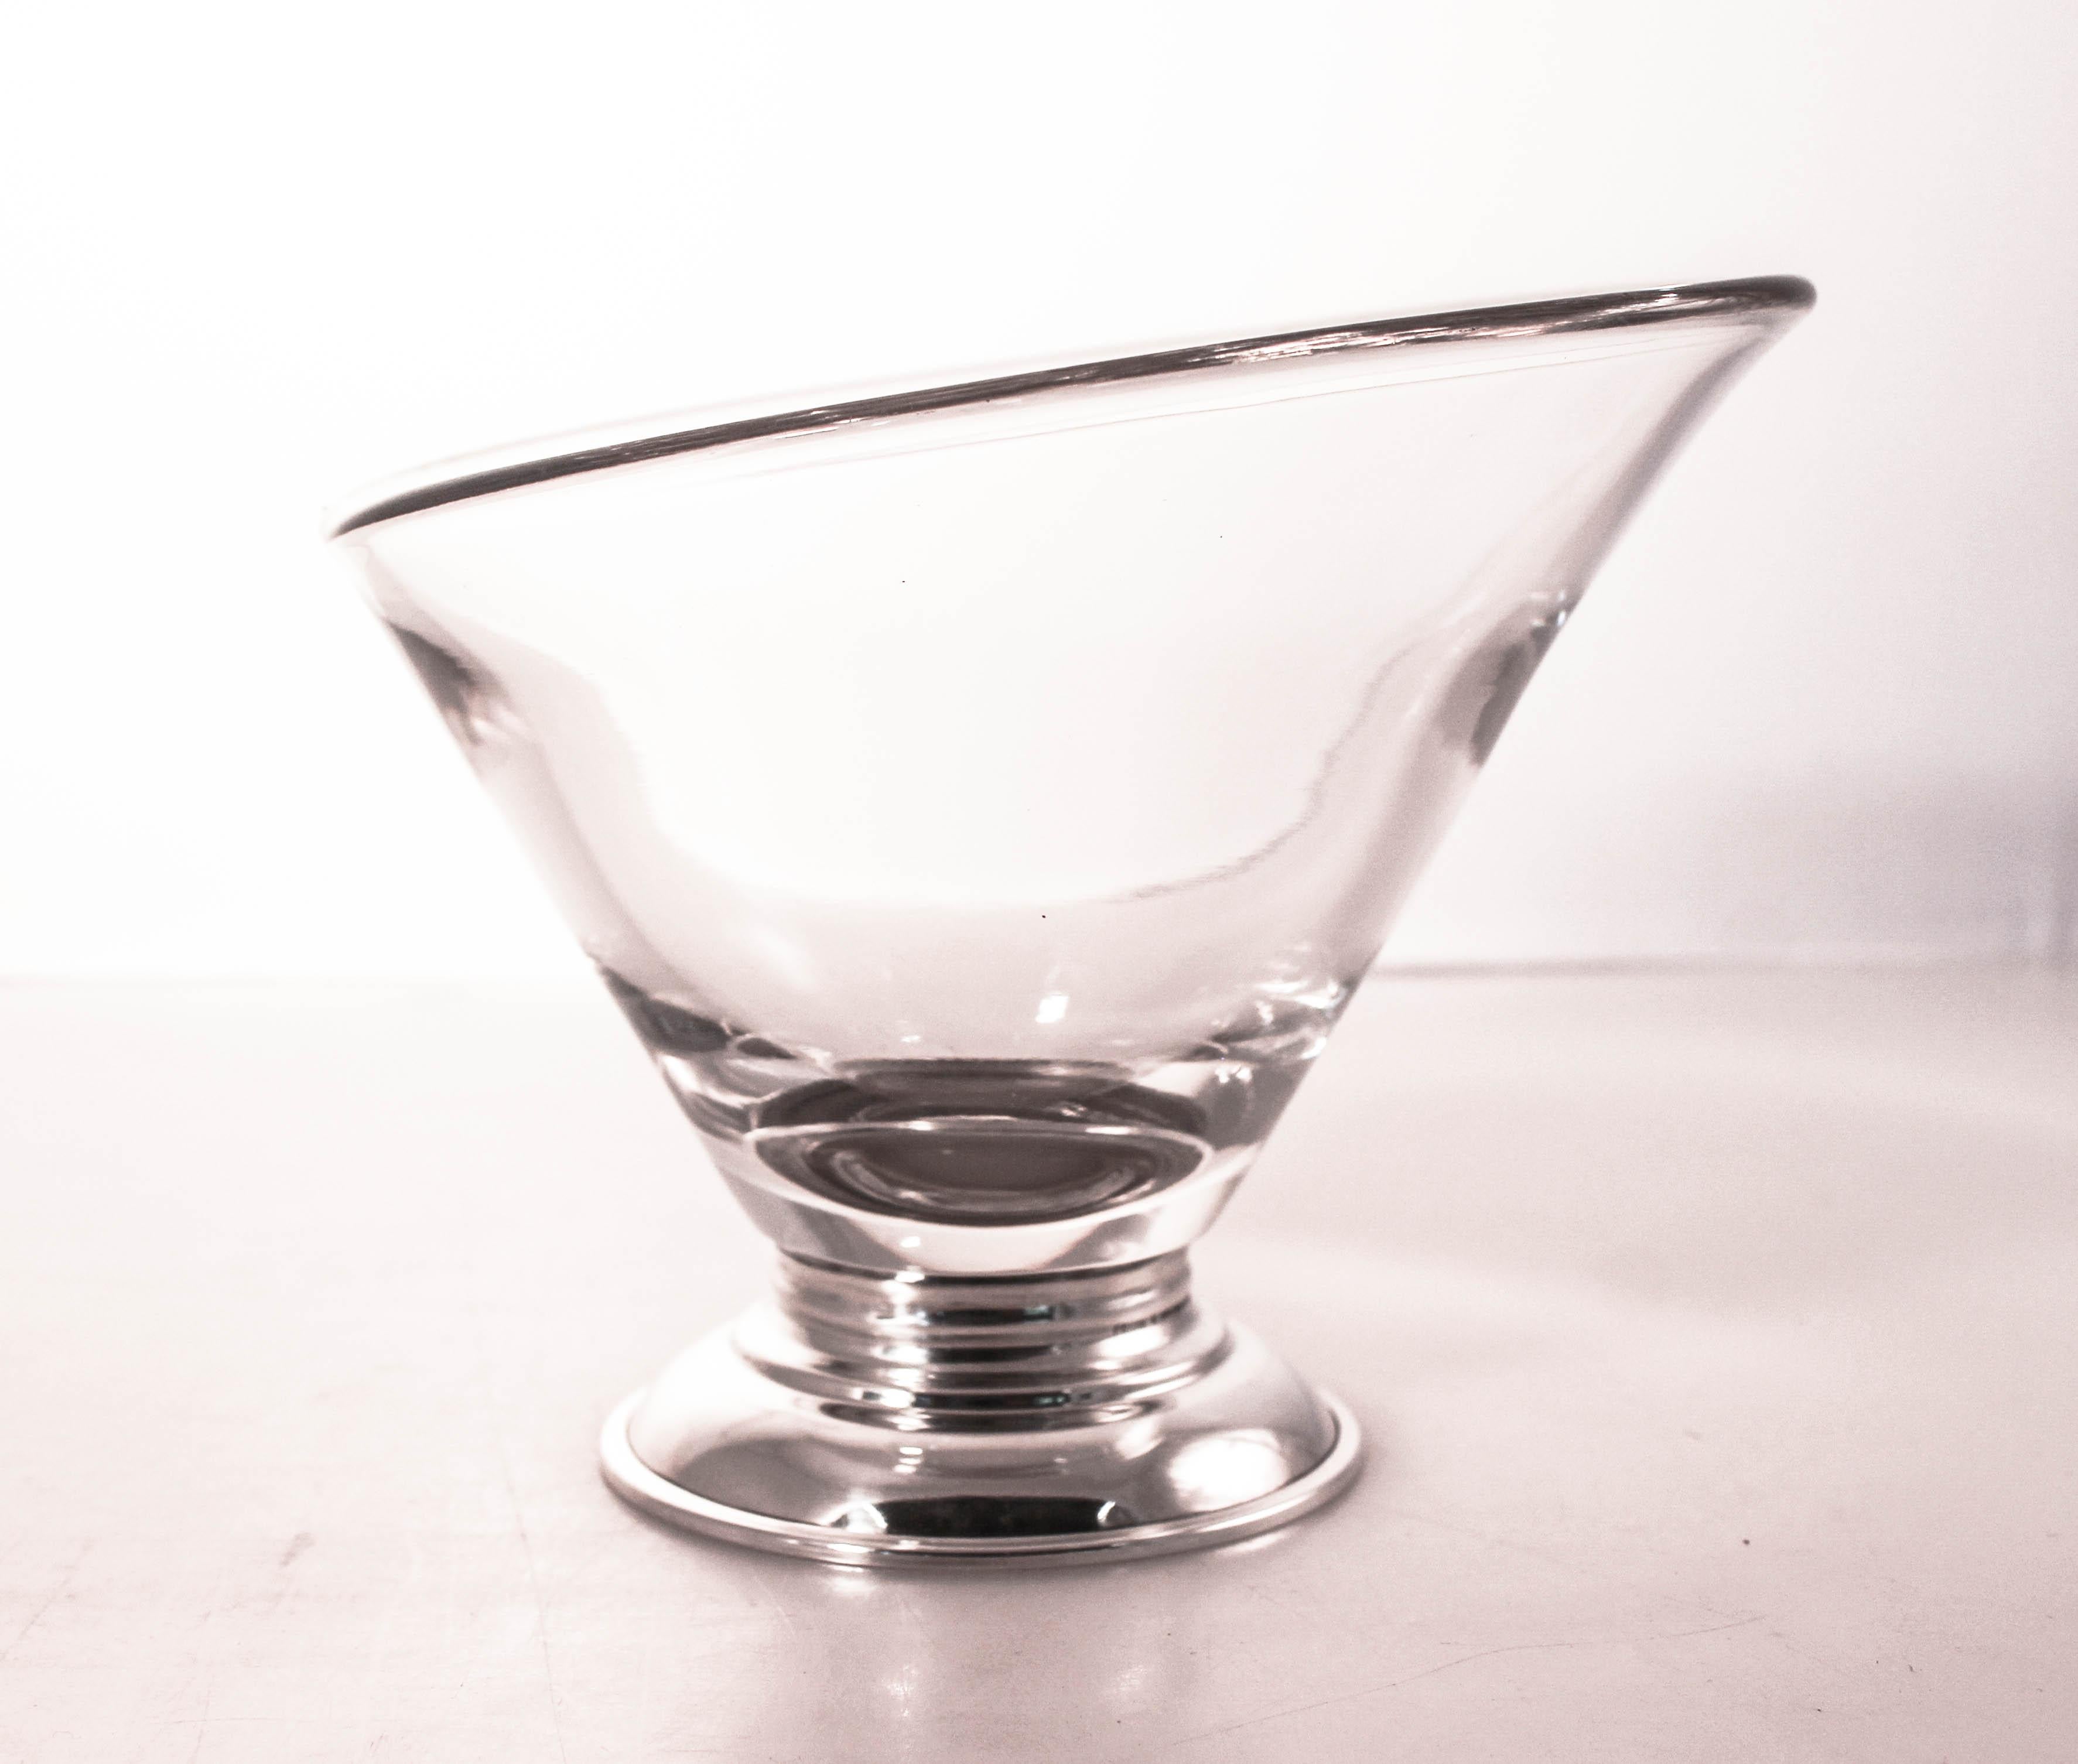 We are thrilled to offer this pair of sterling silver and glass cocktail bowls. A great add-on to your bar; they are not only attractive but practical. The perfect size for olives, lemons or nuts. They have a super modern shape with one side lower